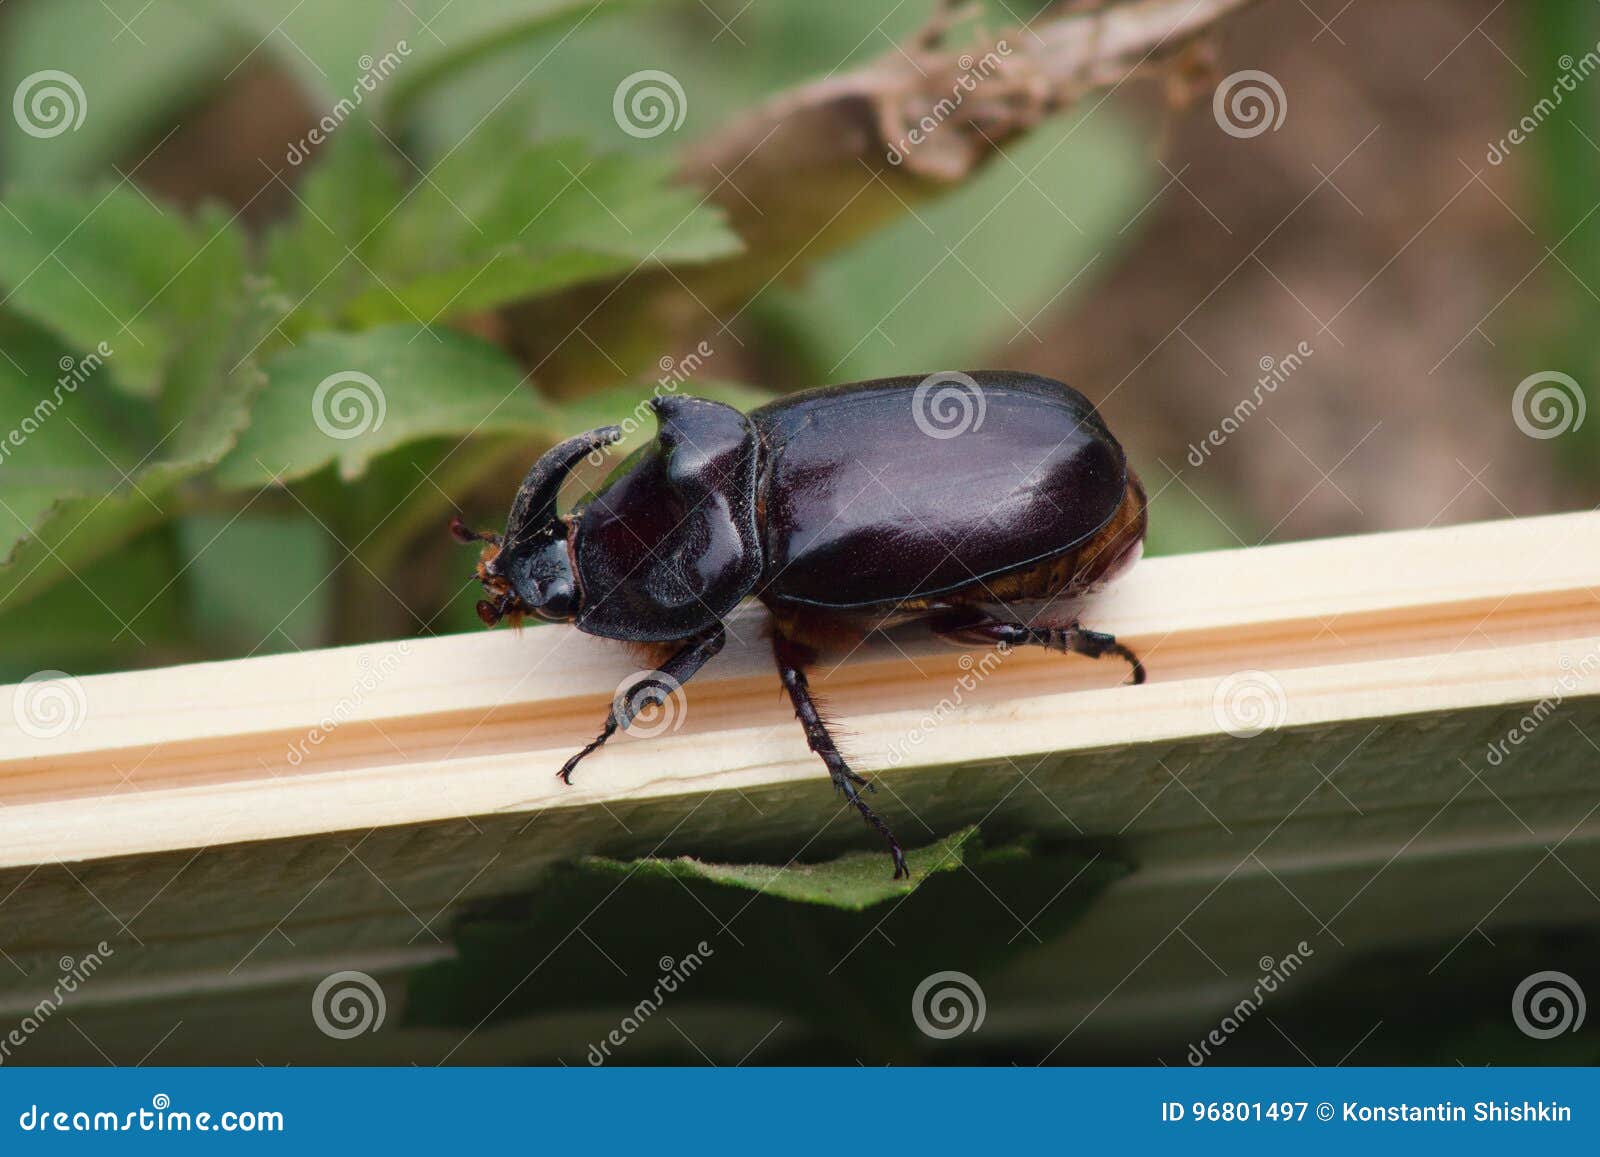 Rhino Beetle On Wooden Bench Insect In Garden Stock Image